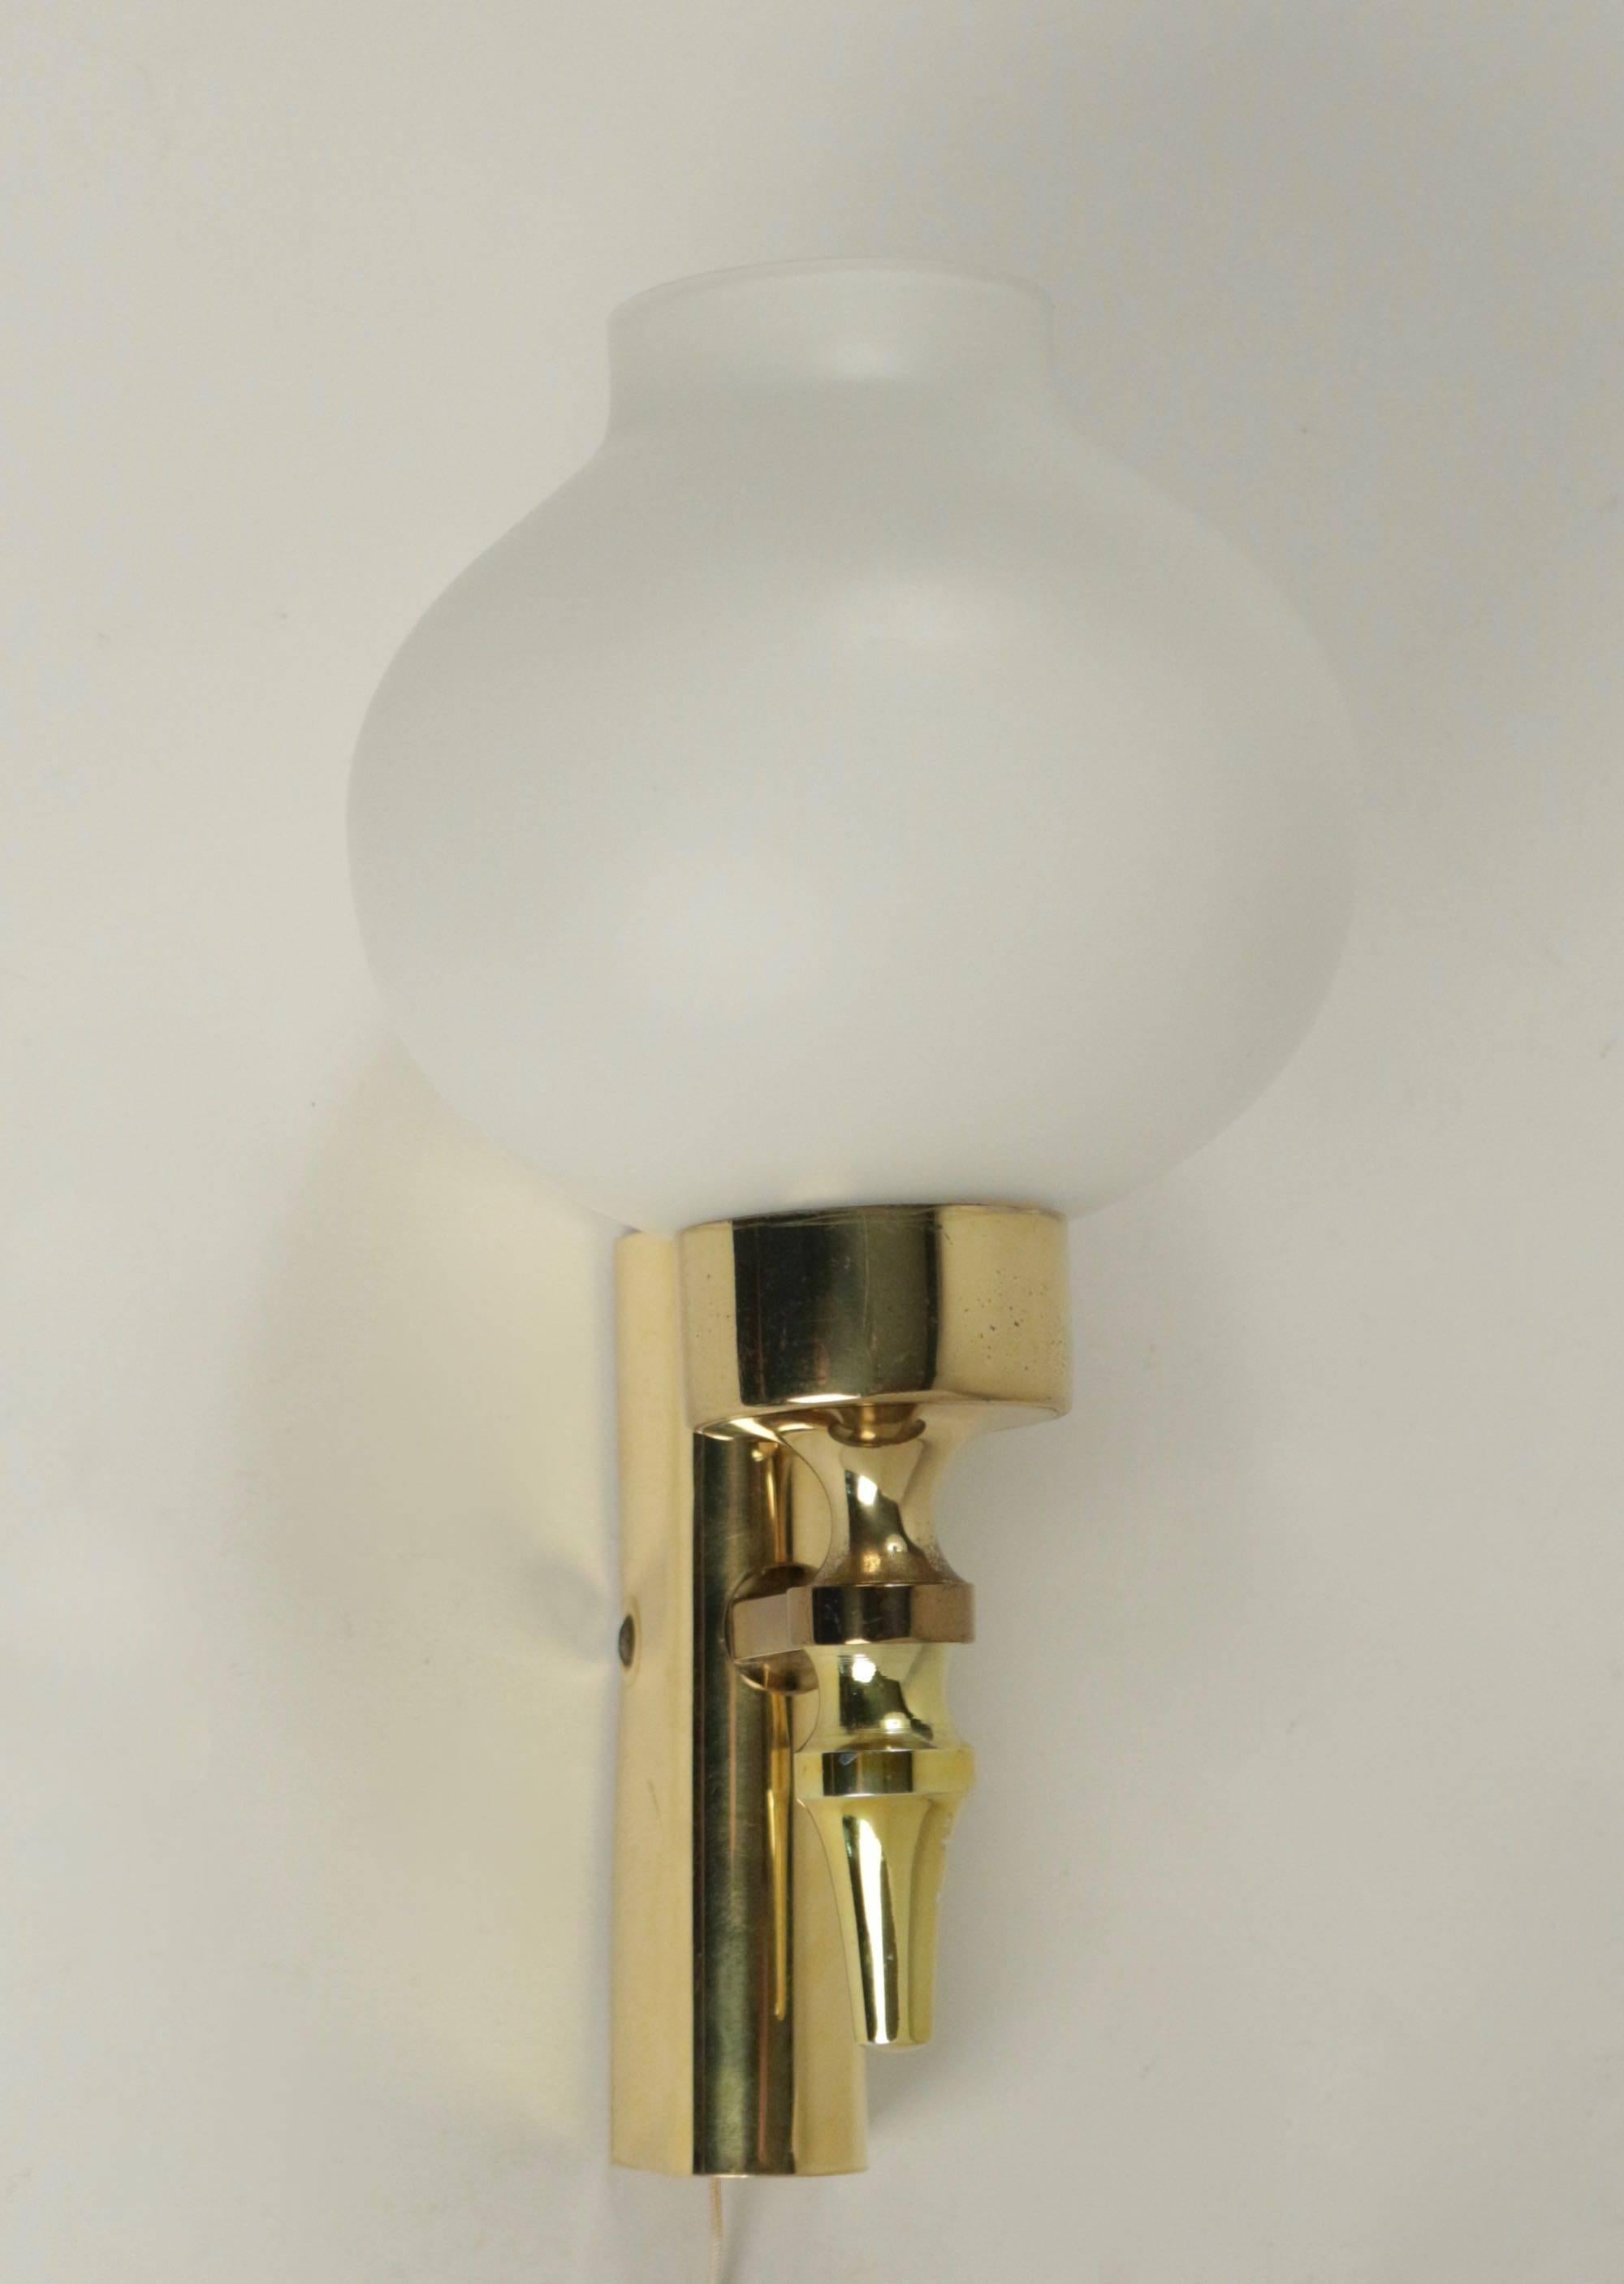 
Composed of a wall support formed by a half cylinder positioned in height in gilded brass.
From the wall base leaves a stem on the low part which support the arm of light dressed with a white satin opaline of origin put on a round cylindrical base